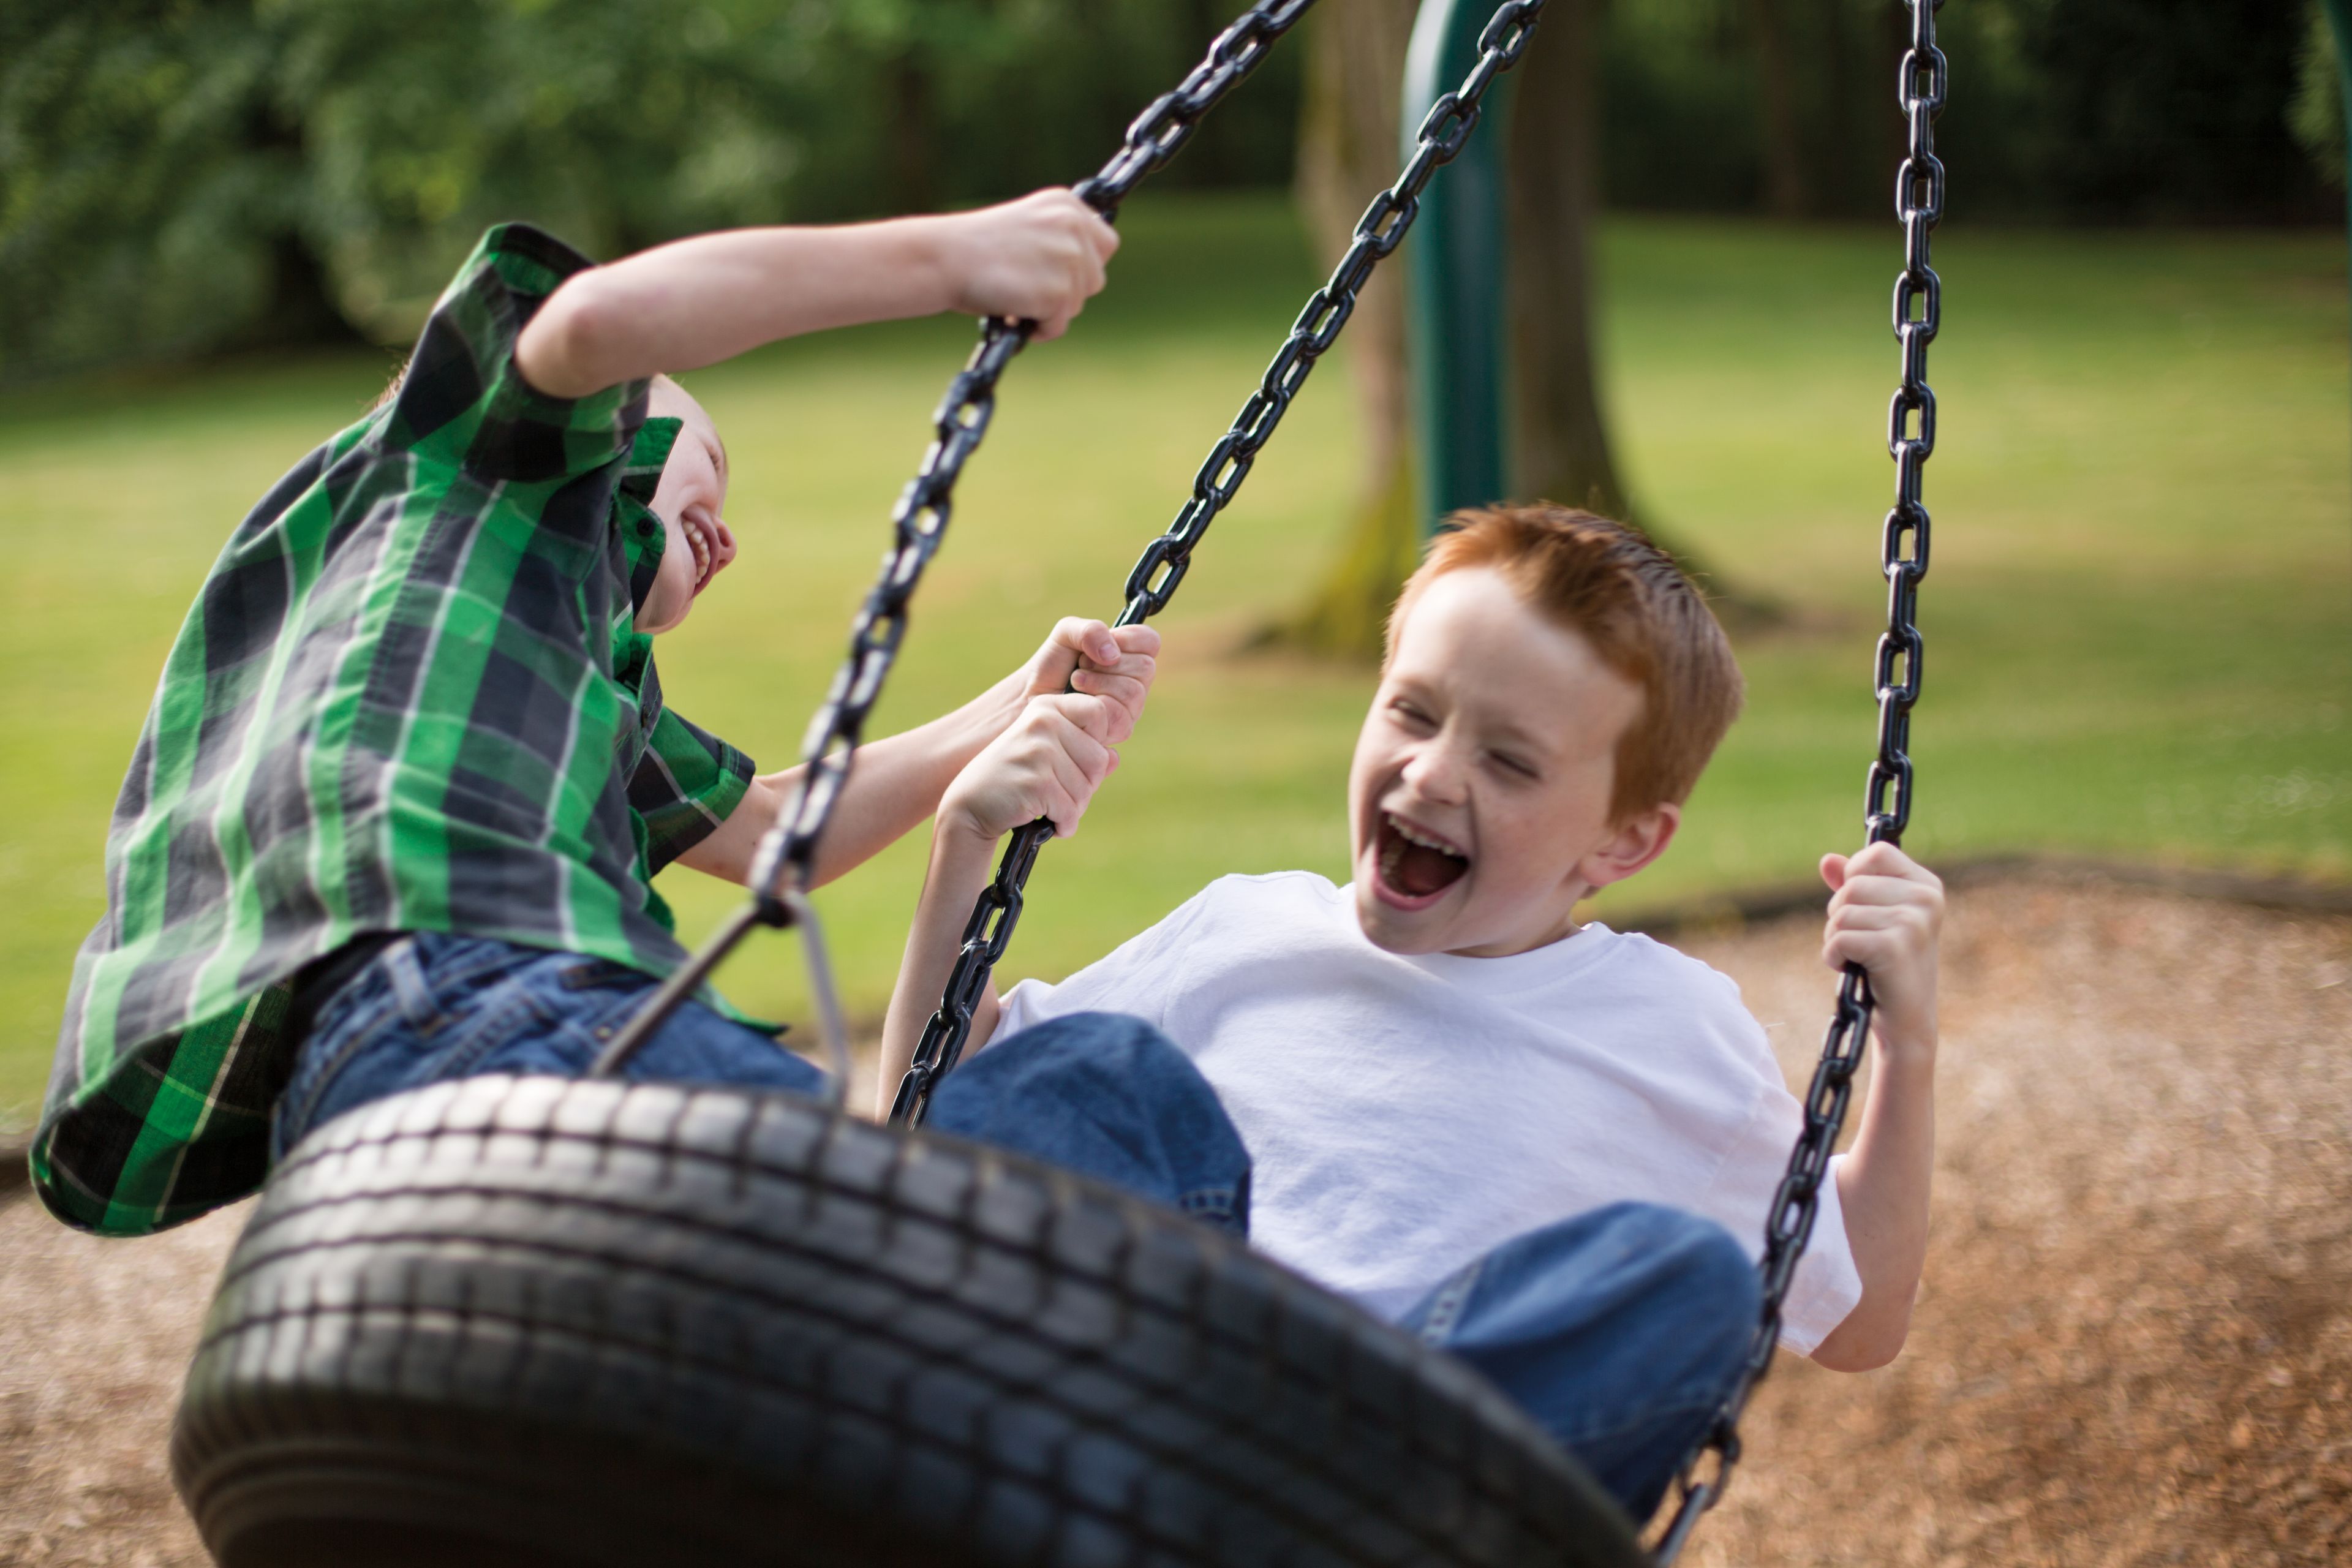 Two boys play on a tire swing.